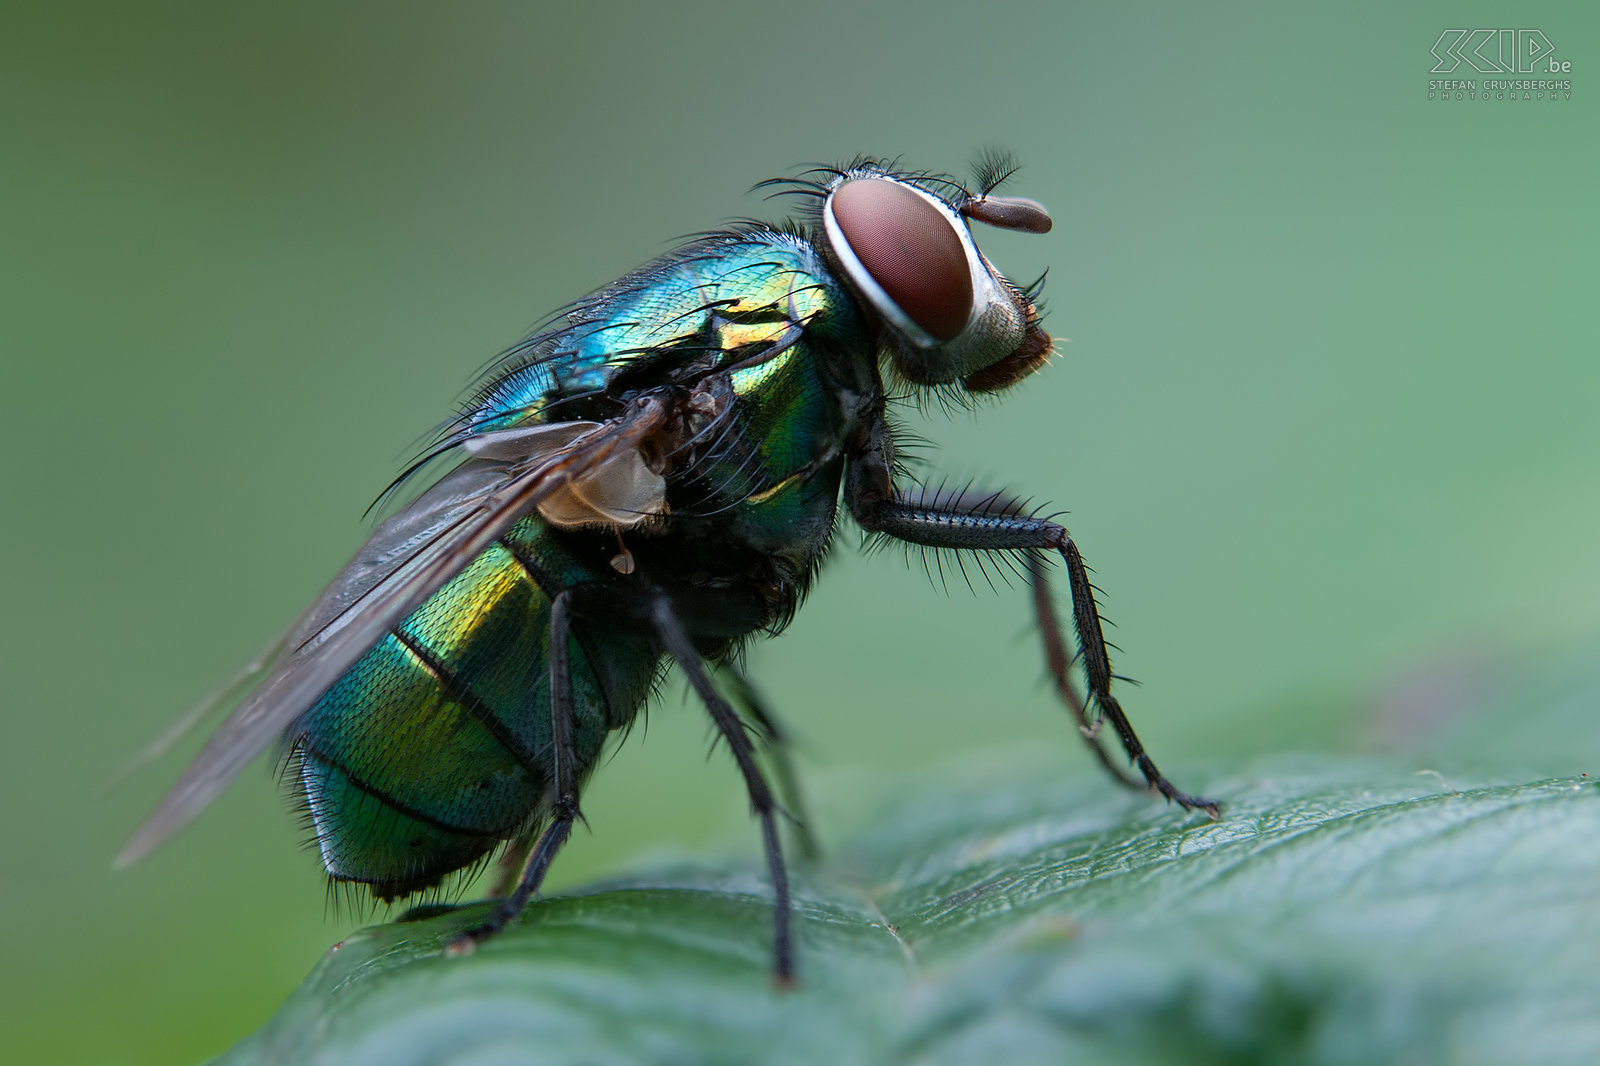 Insects - Blow fly This past summer I have been photographing insects with my new macro lens and extension rings. This resulted in some nice pictures which reveal a lot of interesting details of these insects. Stefan Cruysberghs